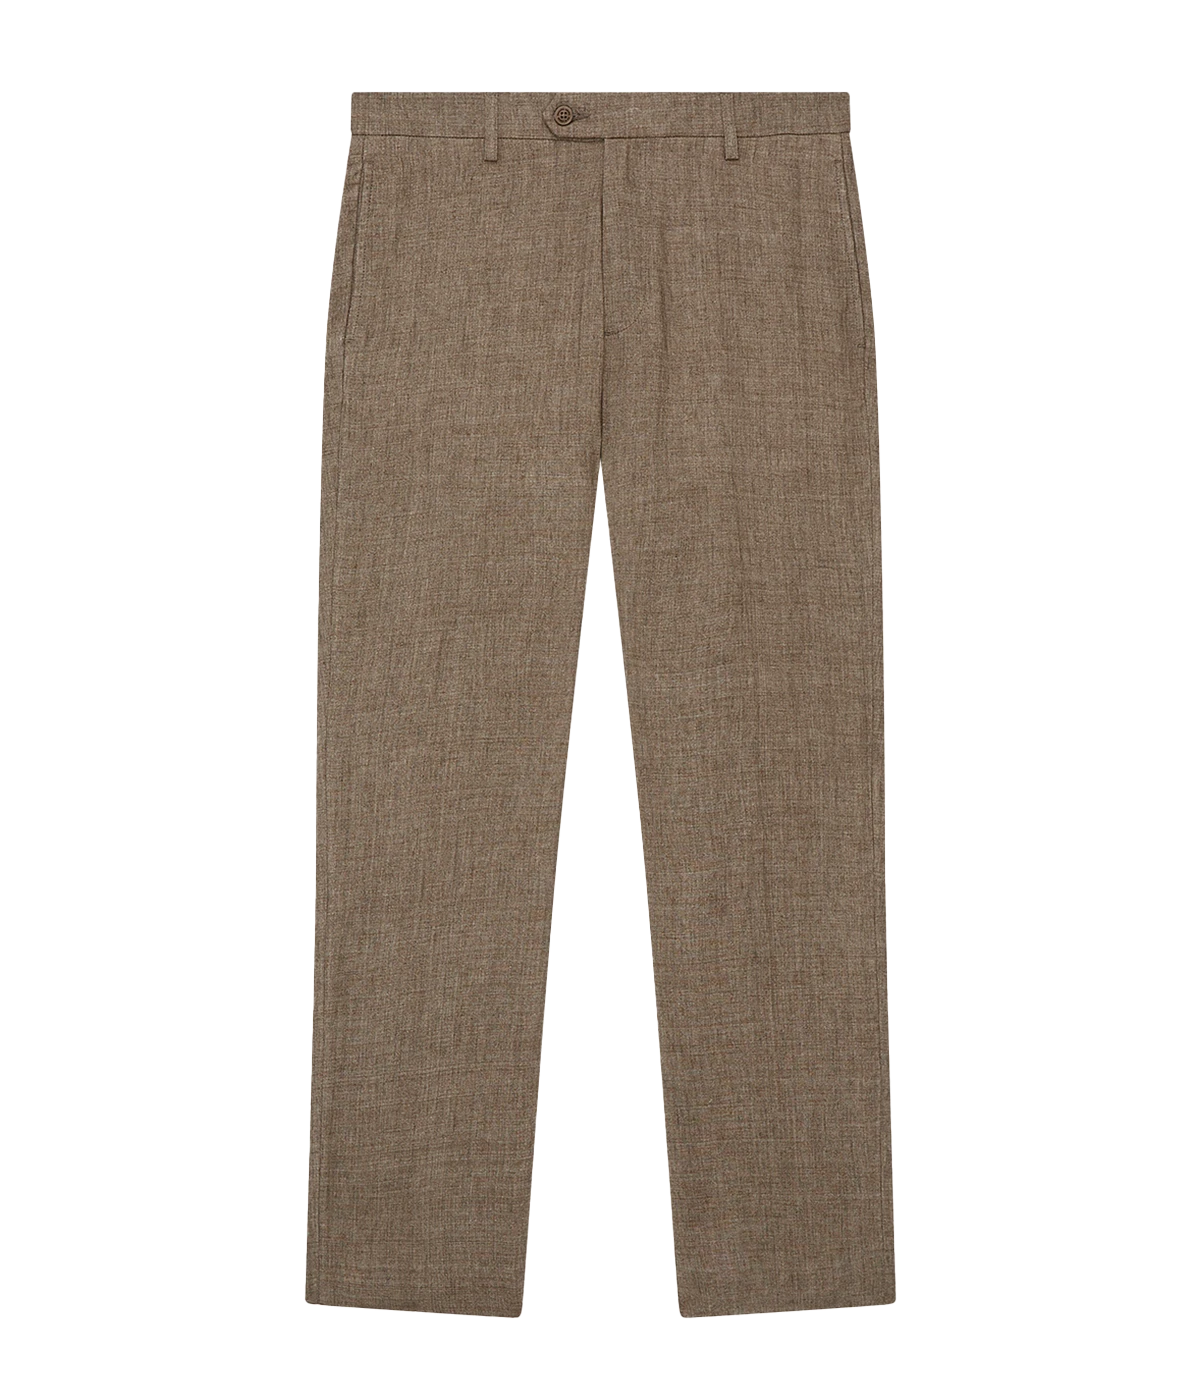 Brown tailored linen pants from Frescobal Carioca, perfect for an elevated look on hot days.